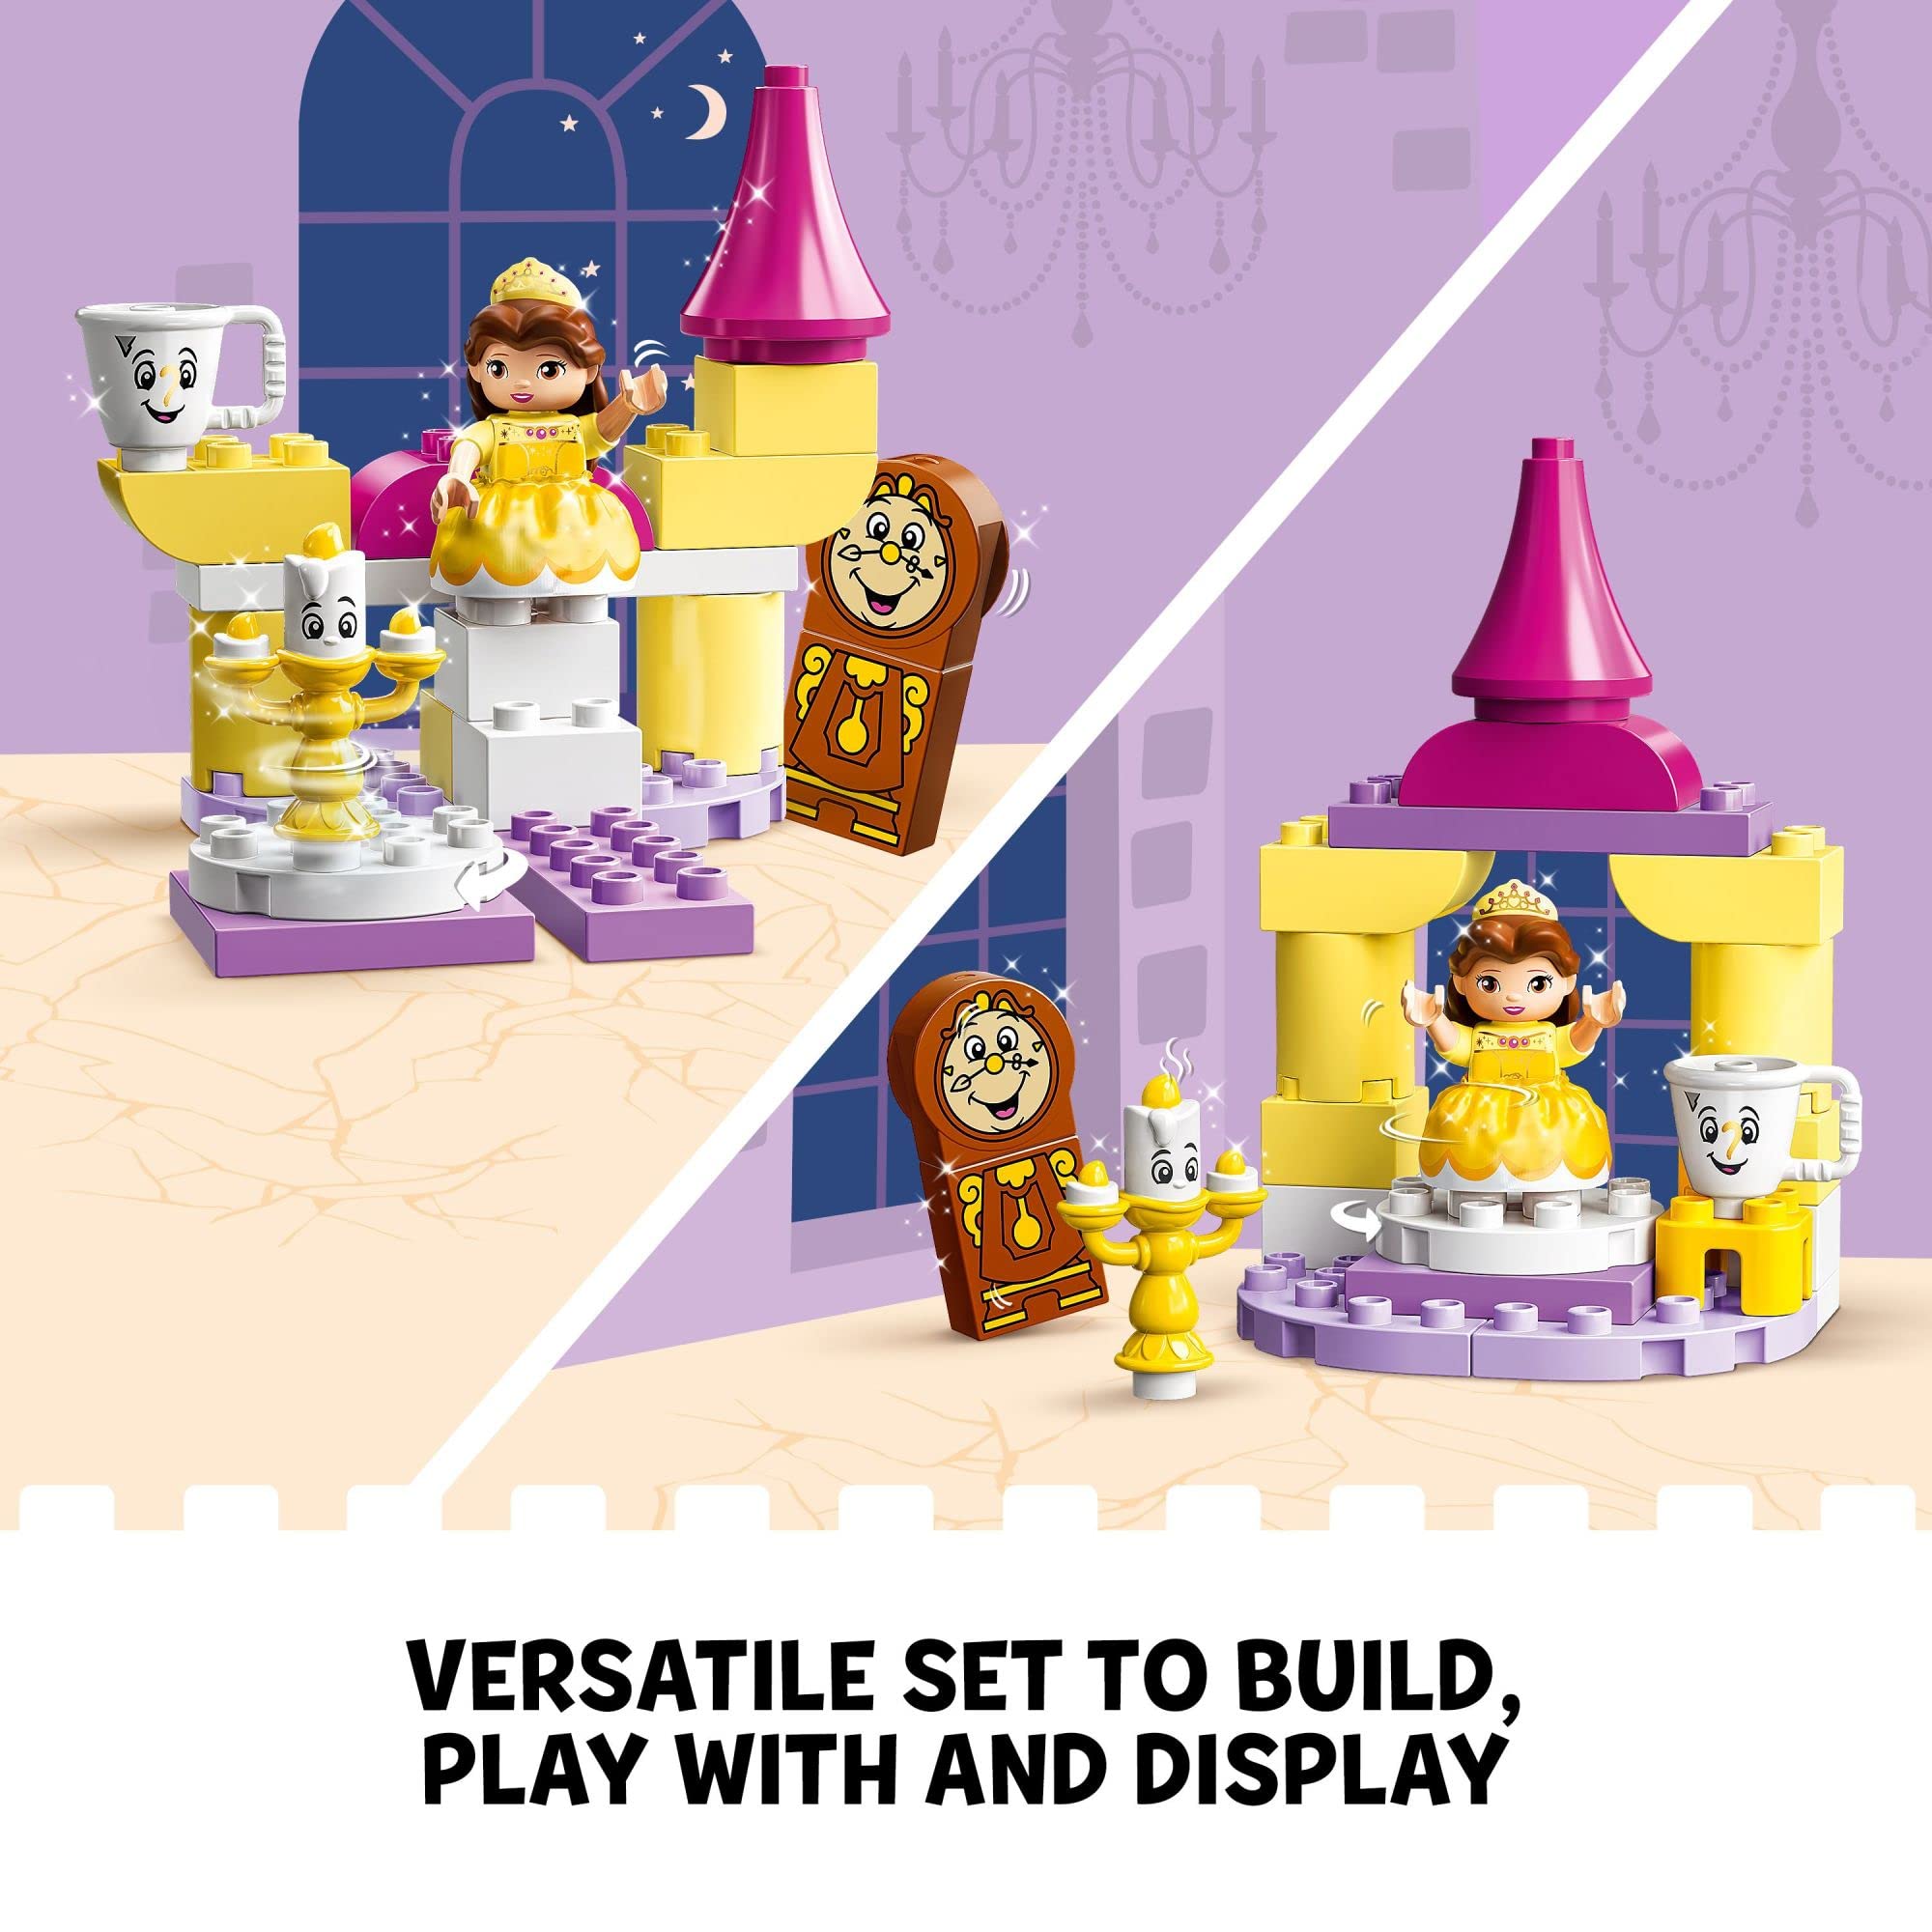 LEGO DUPLO Disney Princess Belle's Ballroom Castle 10960, Beauty and The Beast Building Toy with Princess Belle Mini Doll, Disney Pretend Play Set for Toddlers, Girls and Boys 2 Plus Years Old